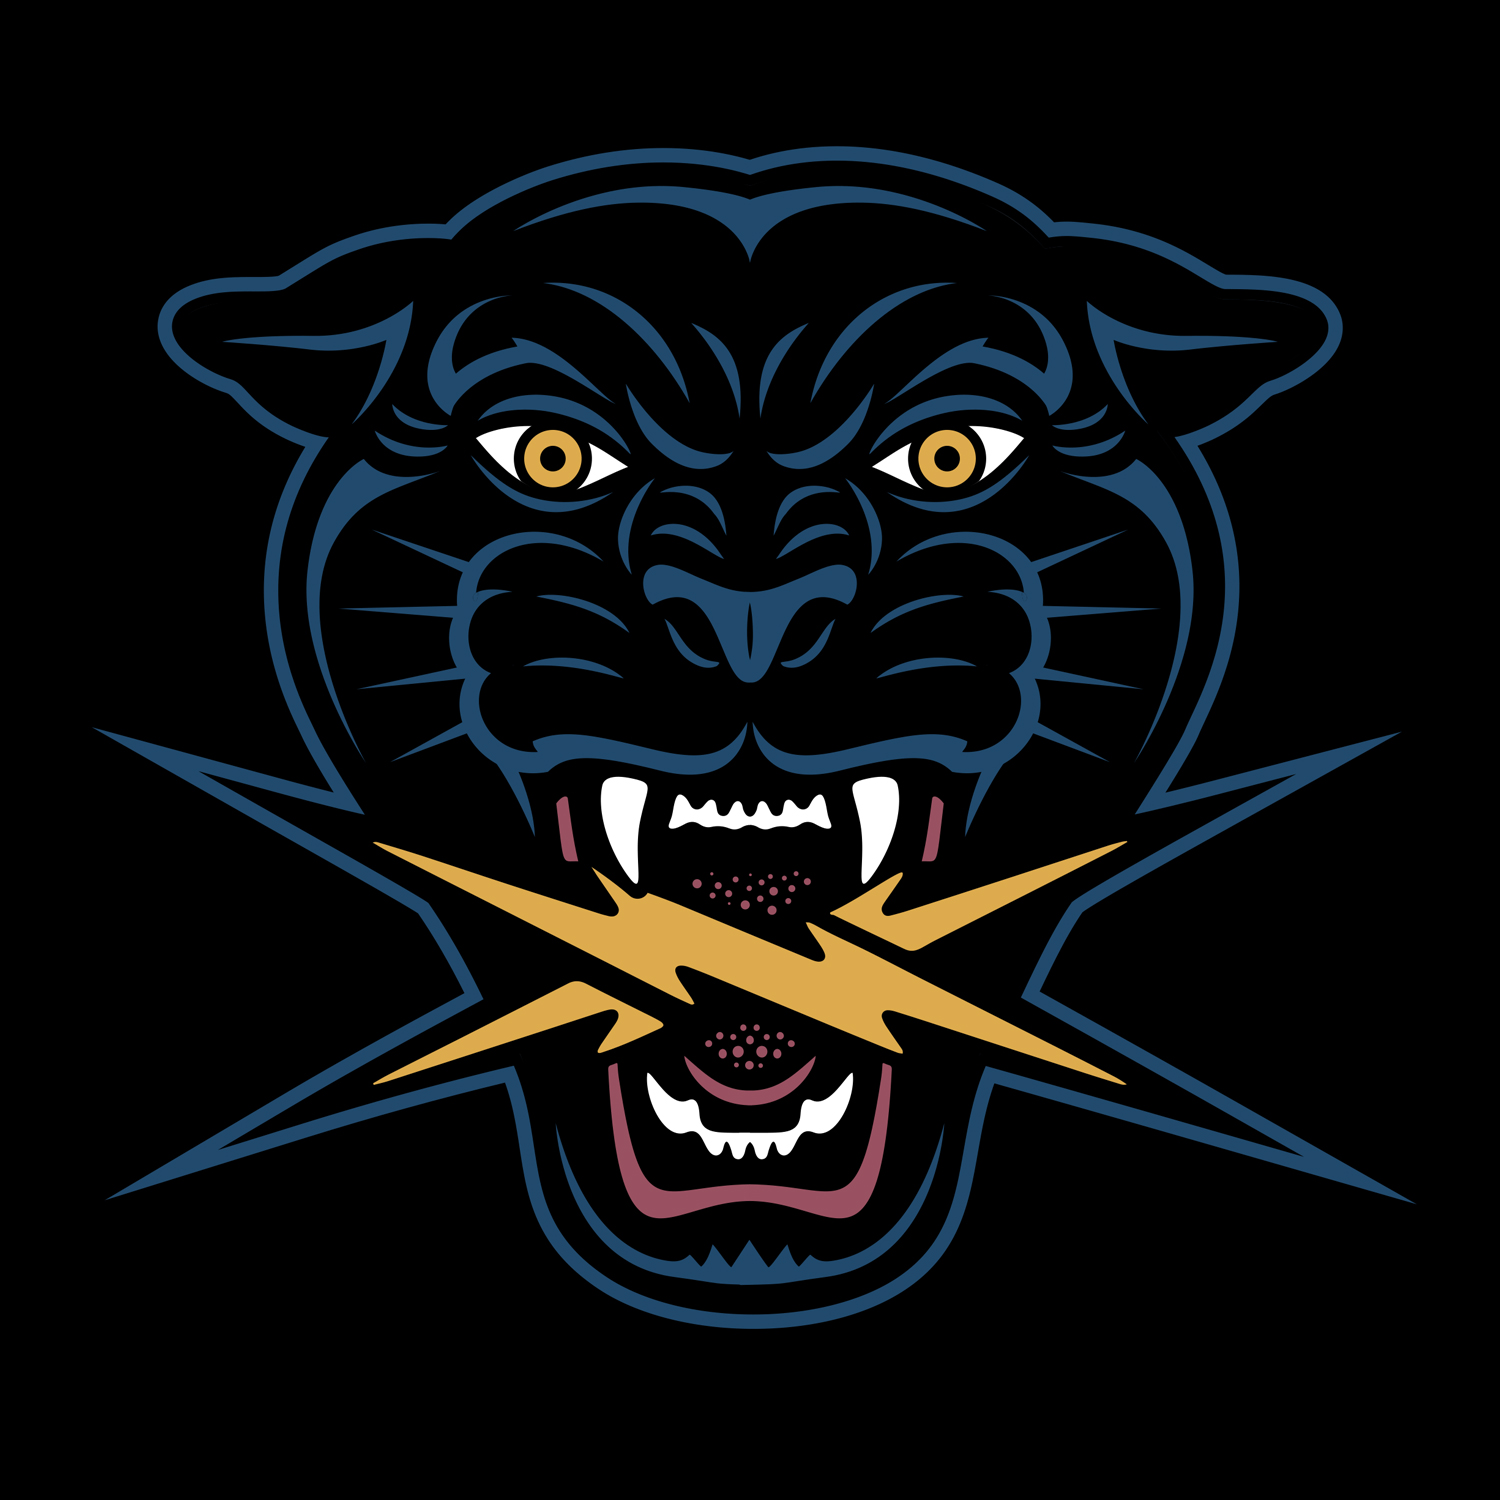 Panther Patch Design